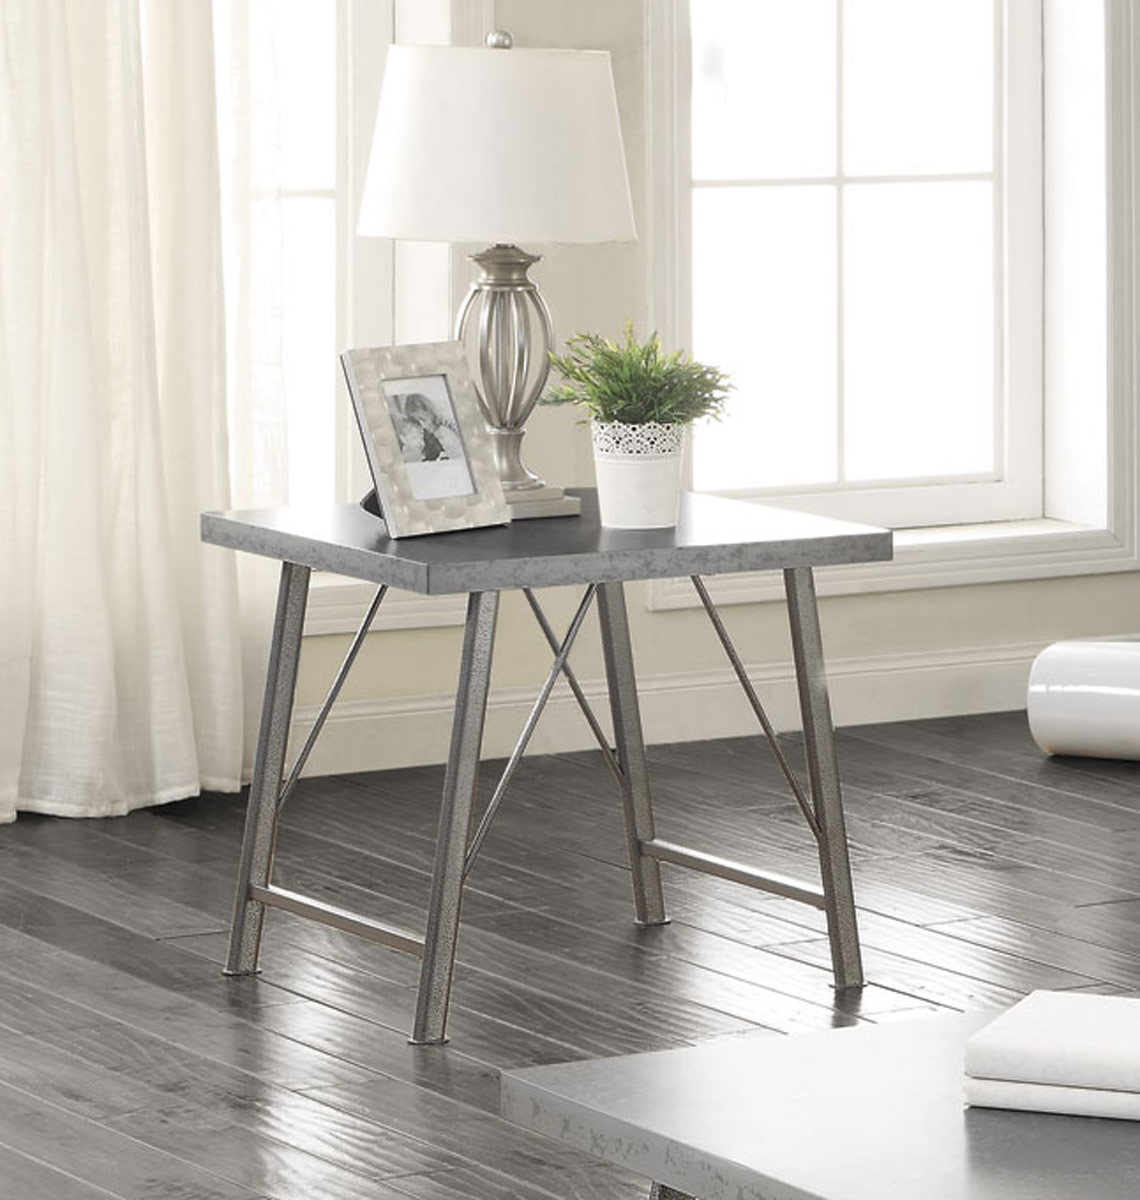 Coaster 703757 End Table - Galvanized and Gunmetal